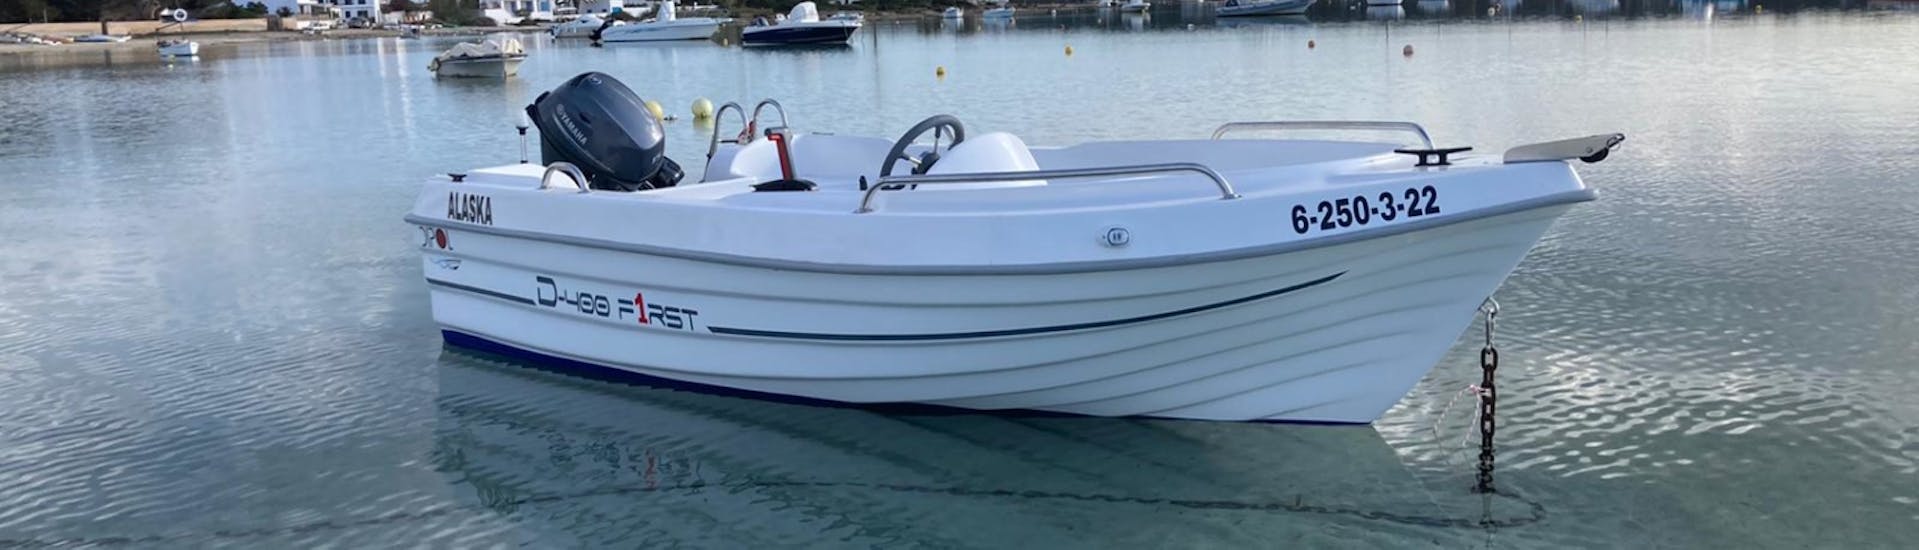 A boat to rent without license in Formentera for up to 4 people with Barco Rent Formentera.